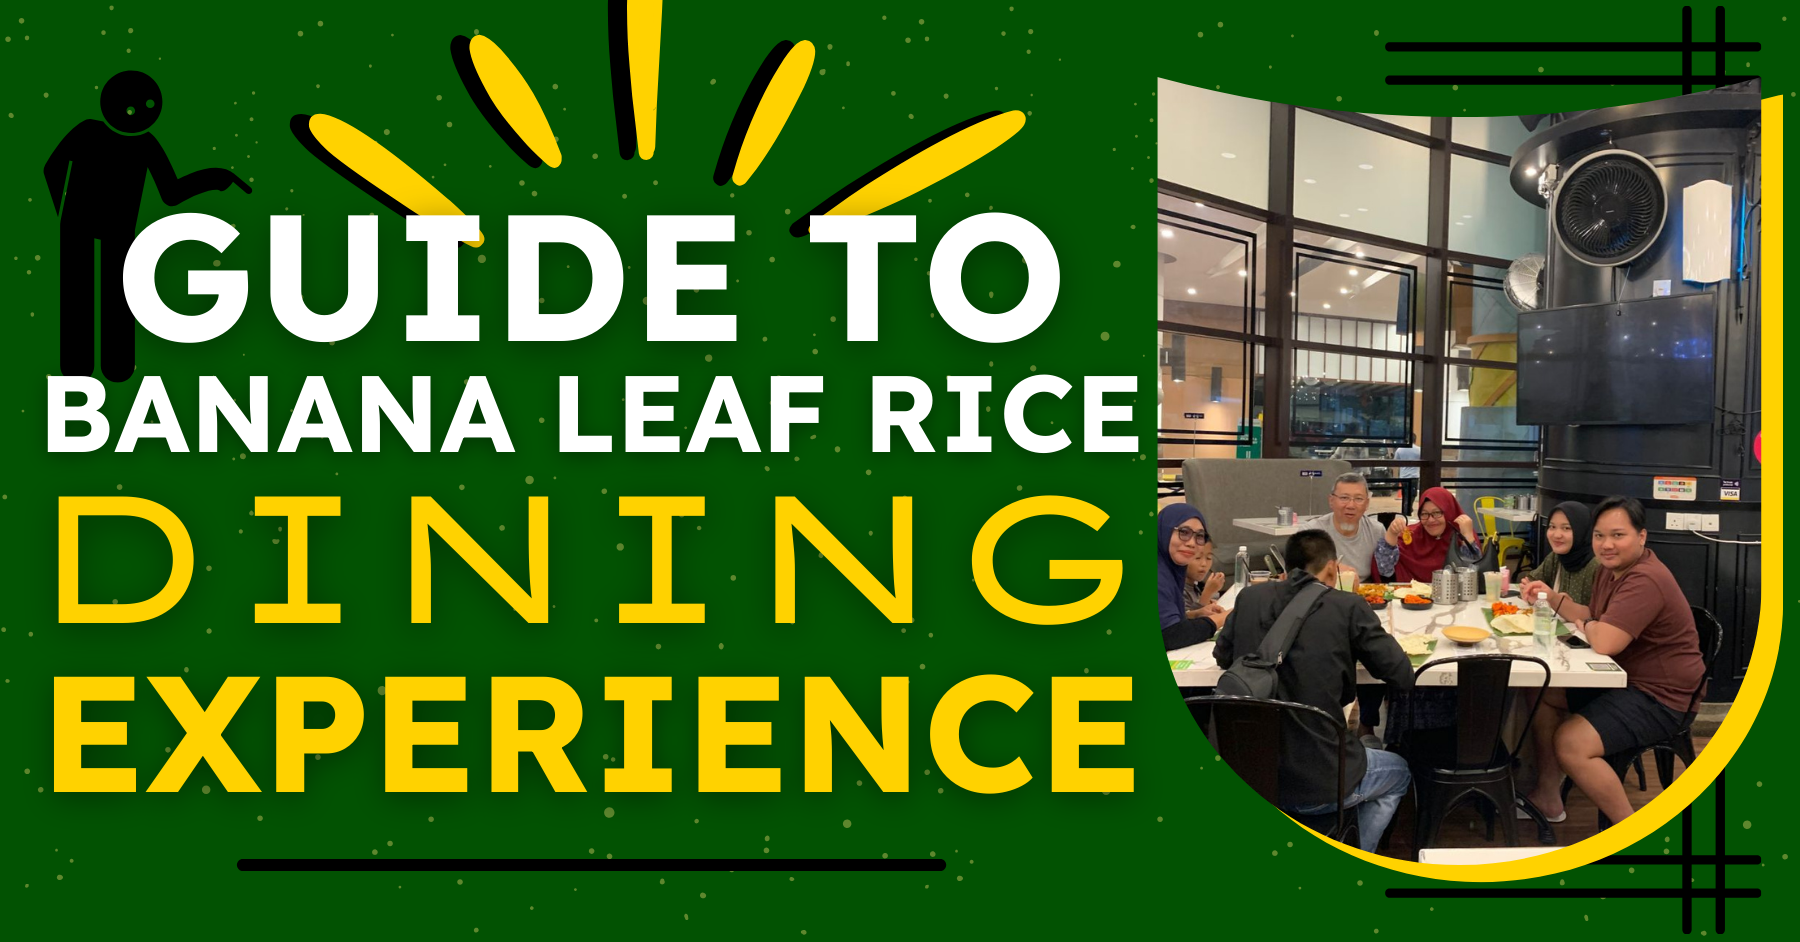 A Guide to Banana Leaf Rice Dining Experiences